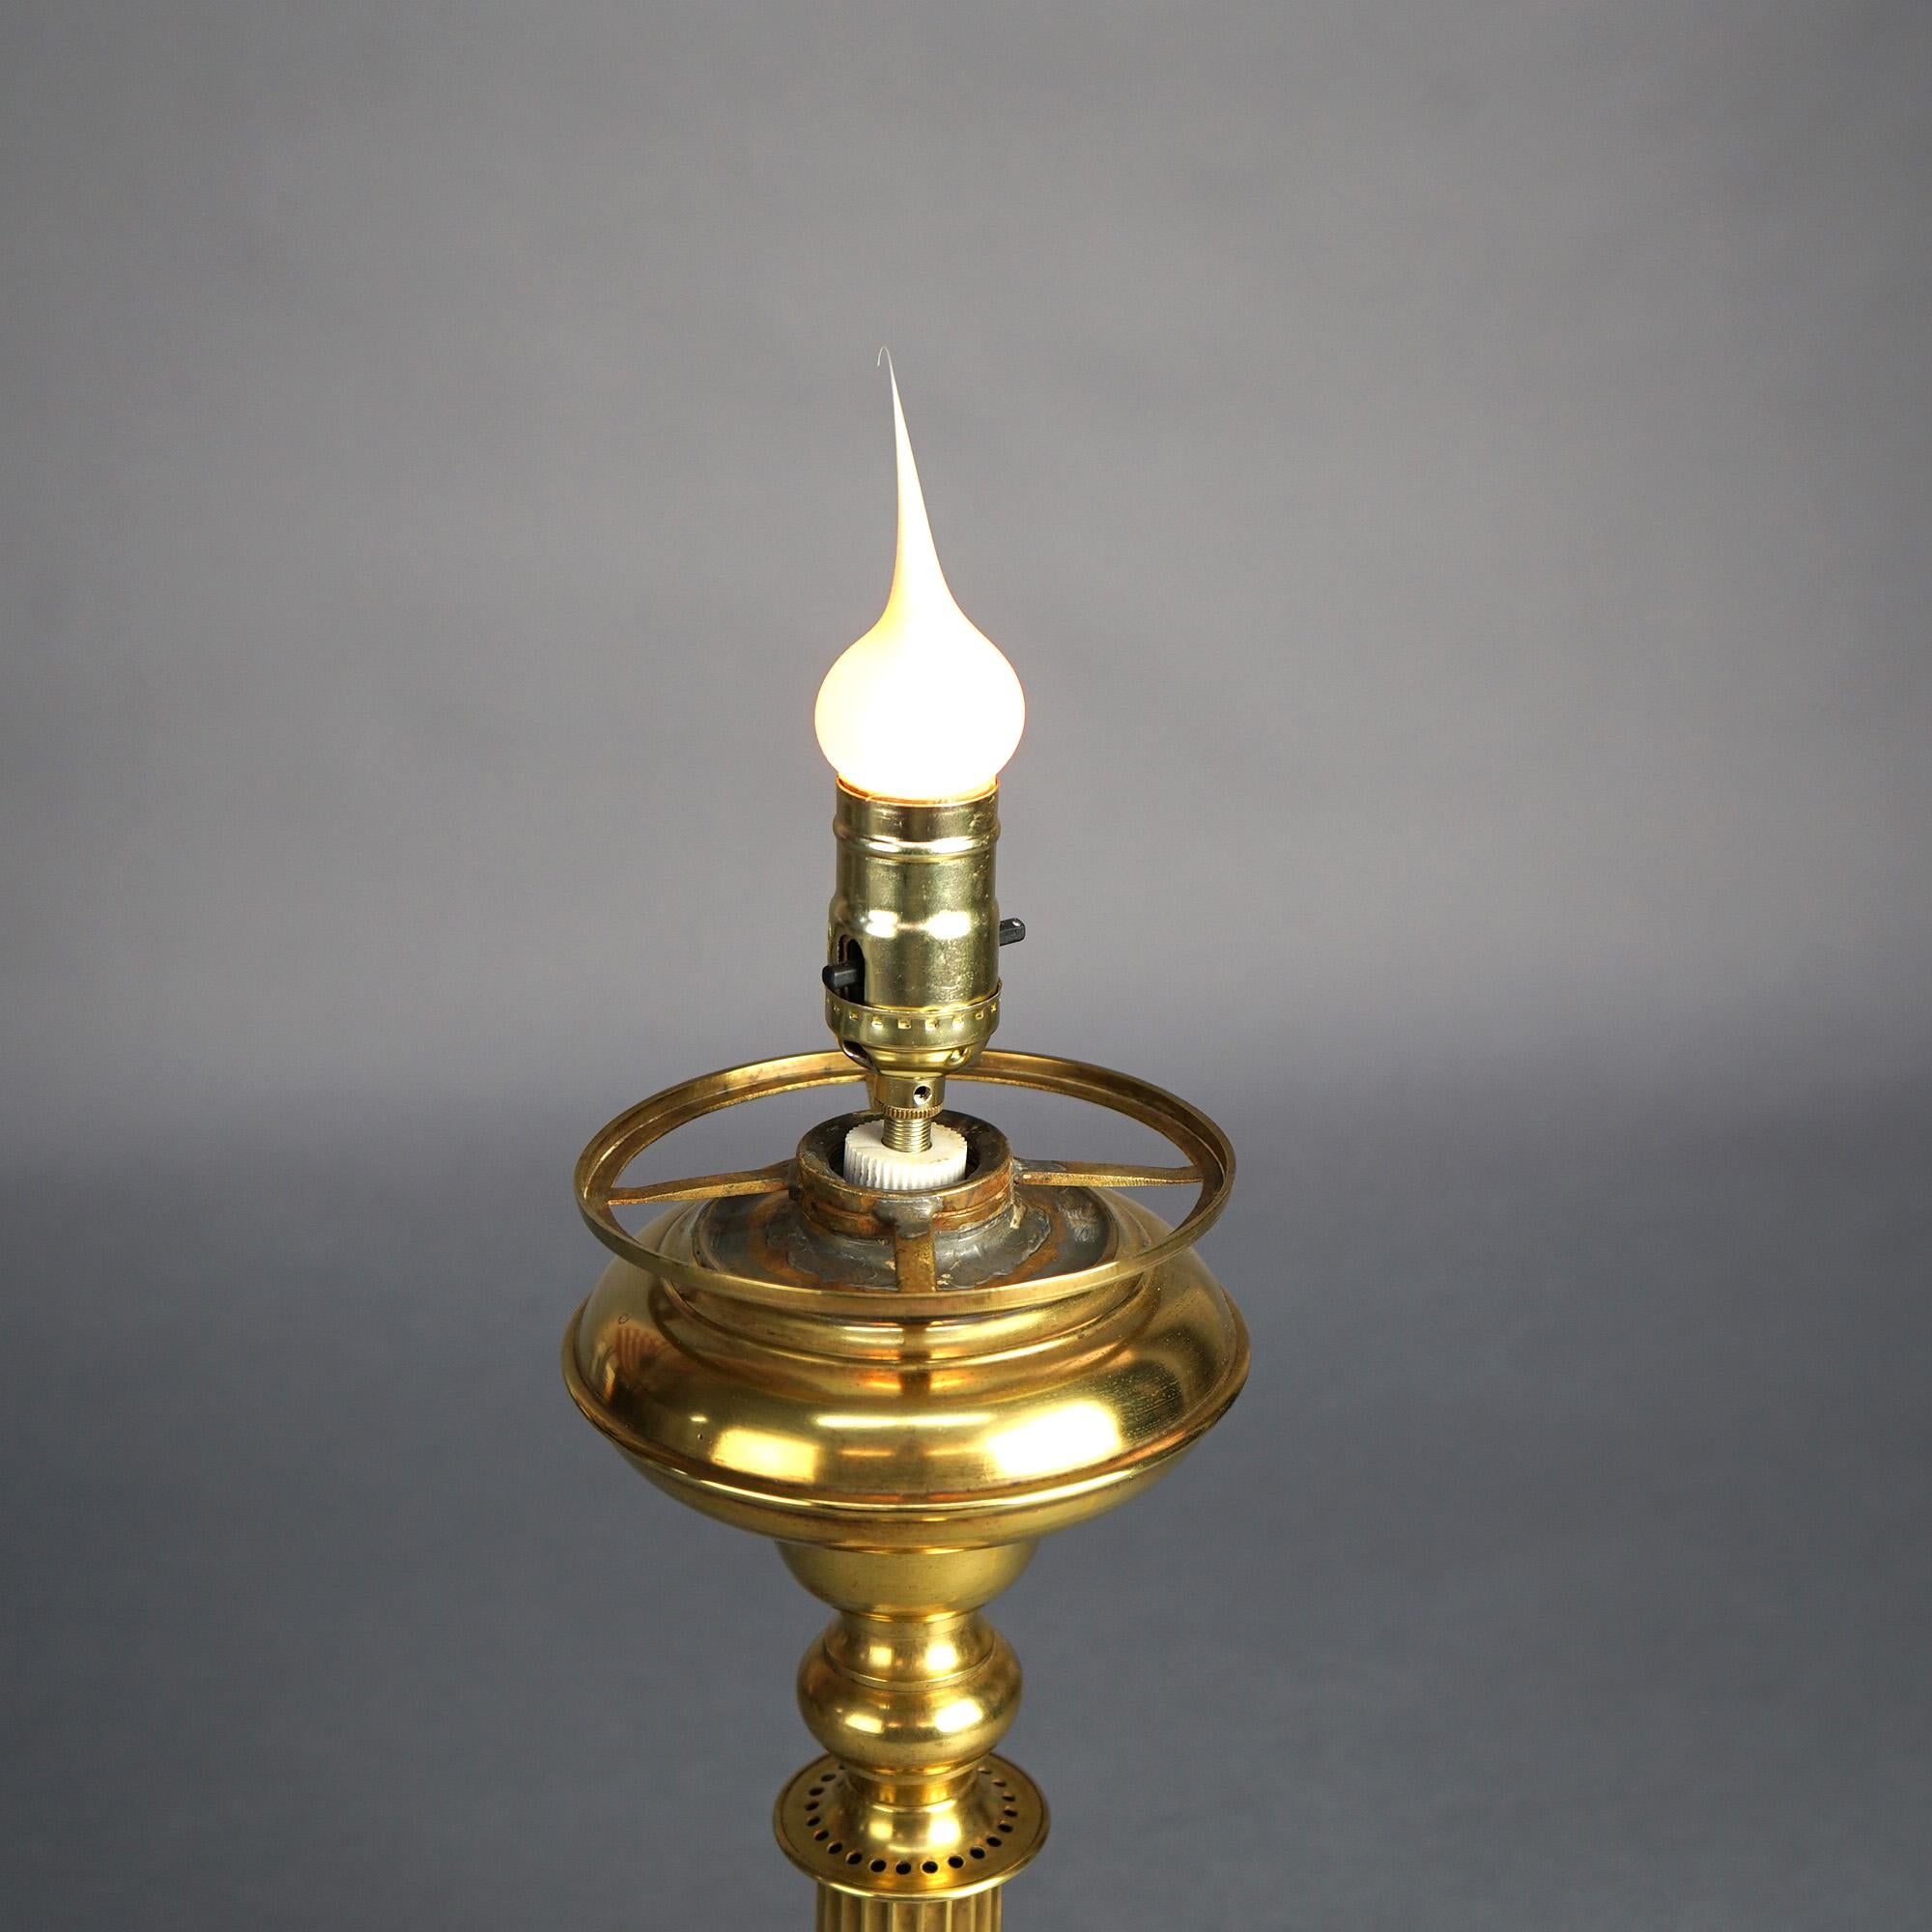 Antique Brass Solar Lamp with Tam-O-Shanter Cut Glass Shade & Marble Base C1840 For Sale 4